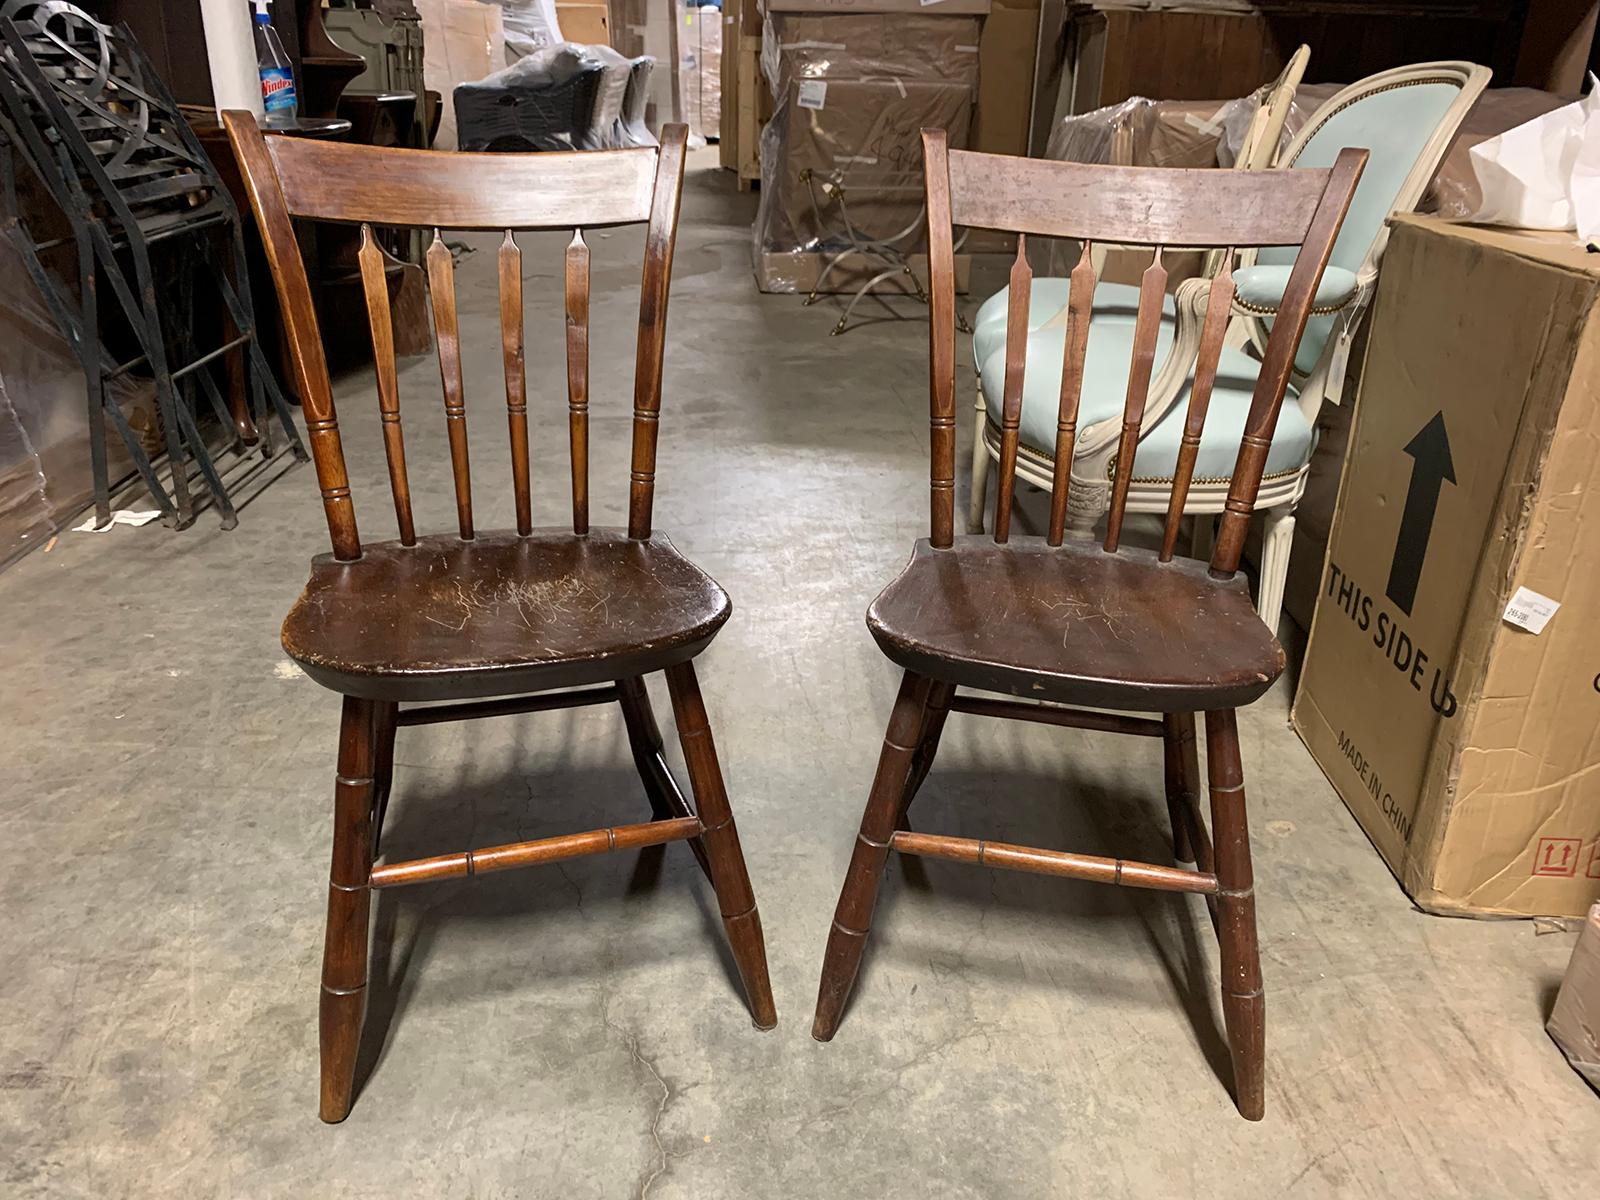 Pair of 19th century American side chairs.